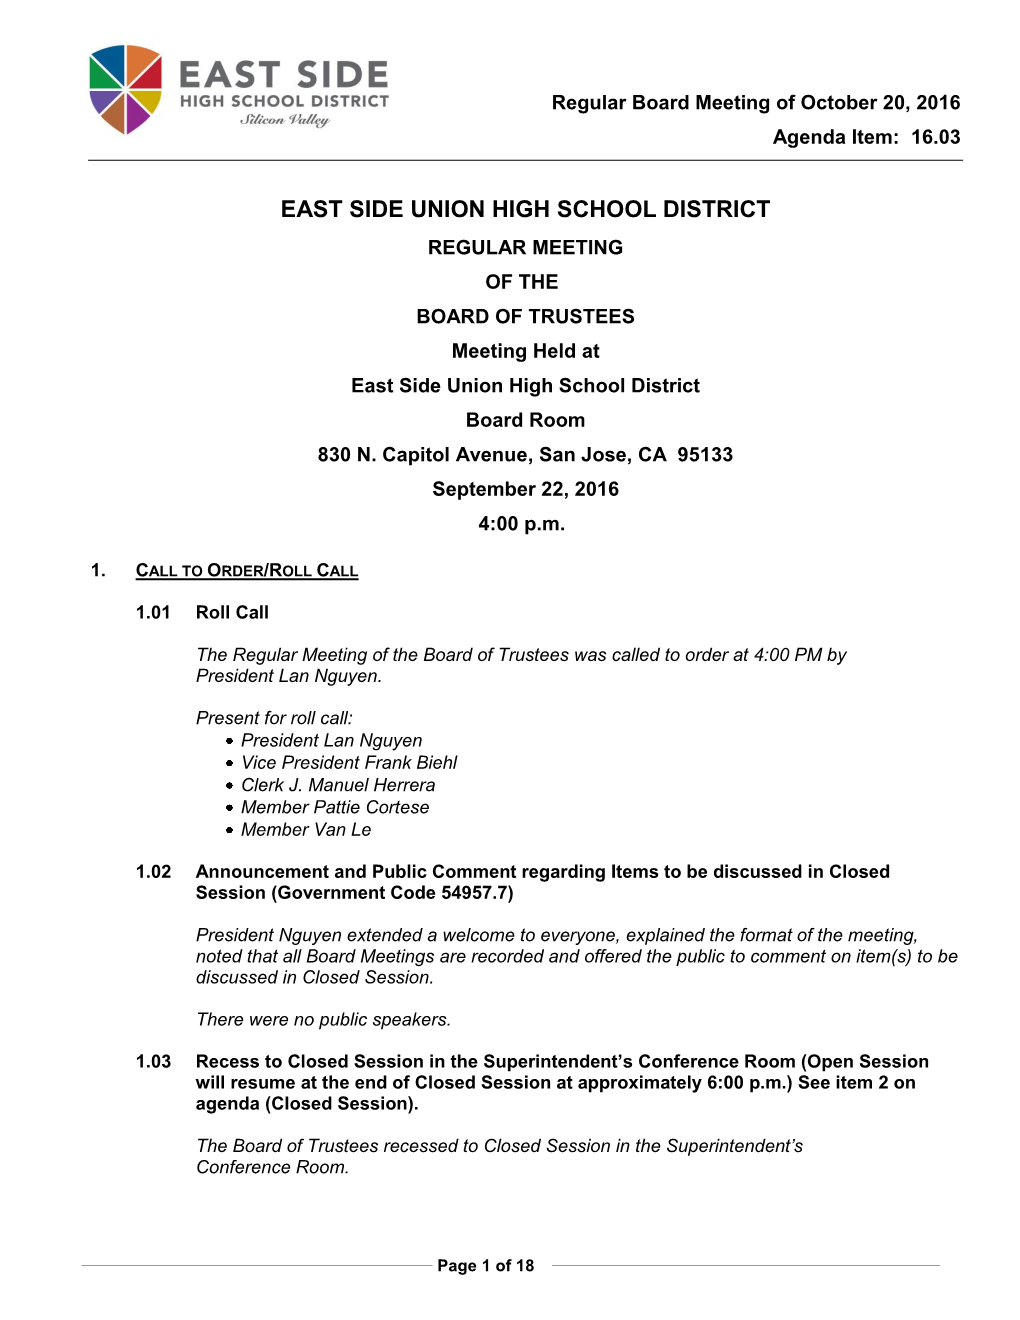 EAST SIDE UNION HIGH SCHOOL DISTRICT REGULAR MEETING of the BOARD of TRUSTEES Meeting Held at East Side Union High School District Board Room 830 N